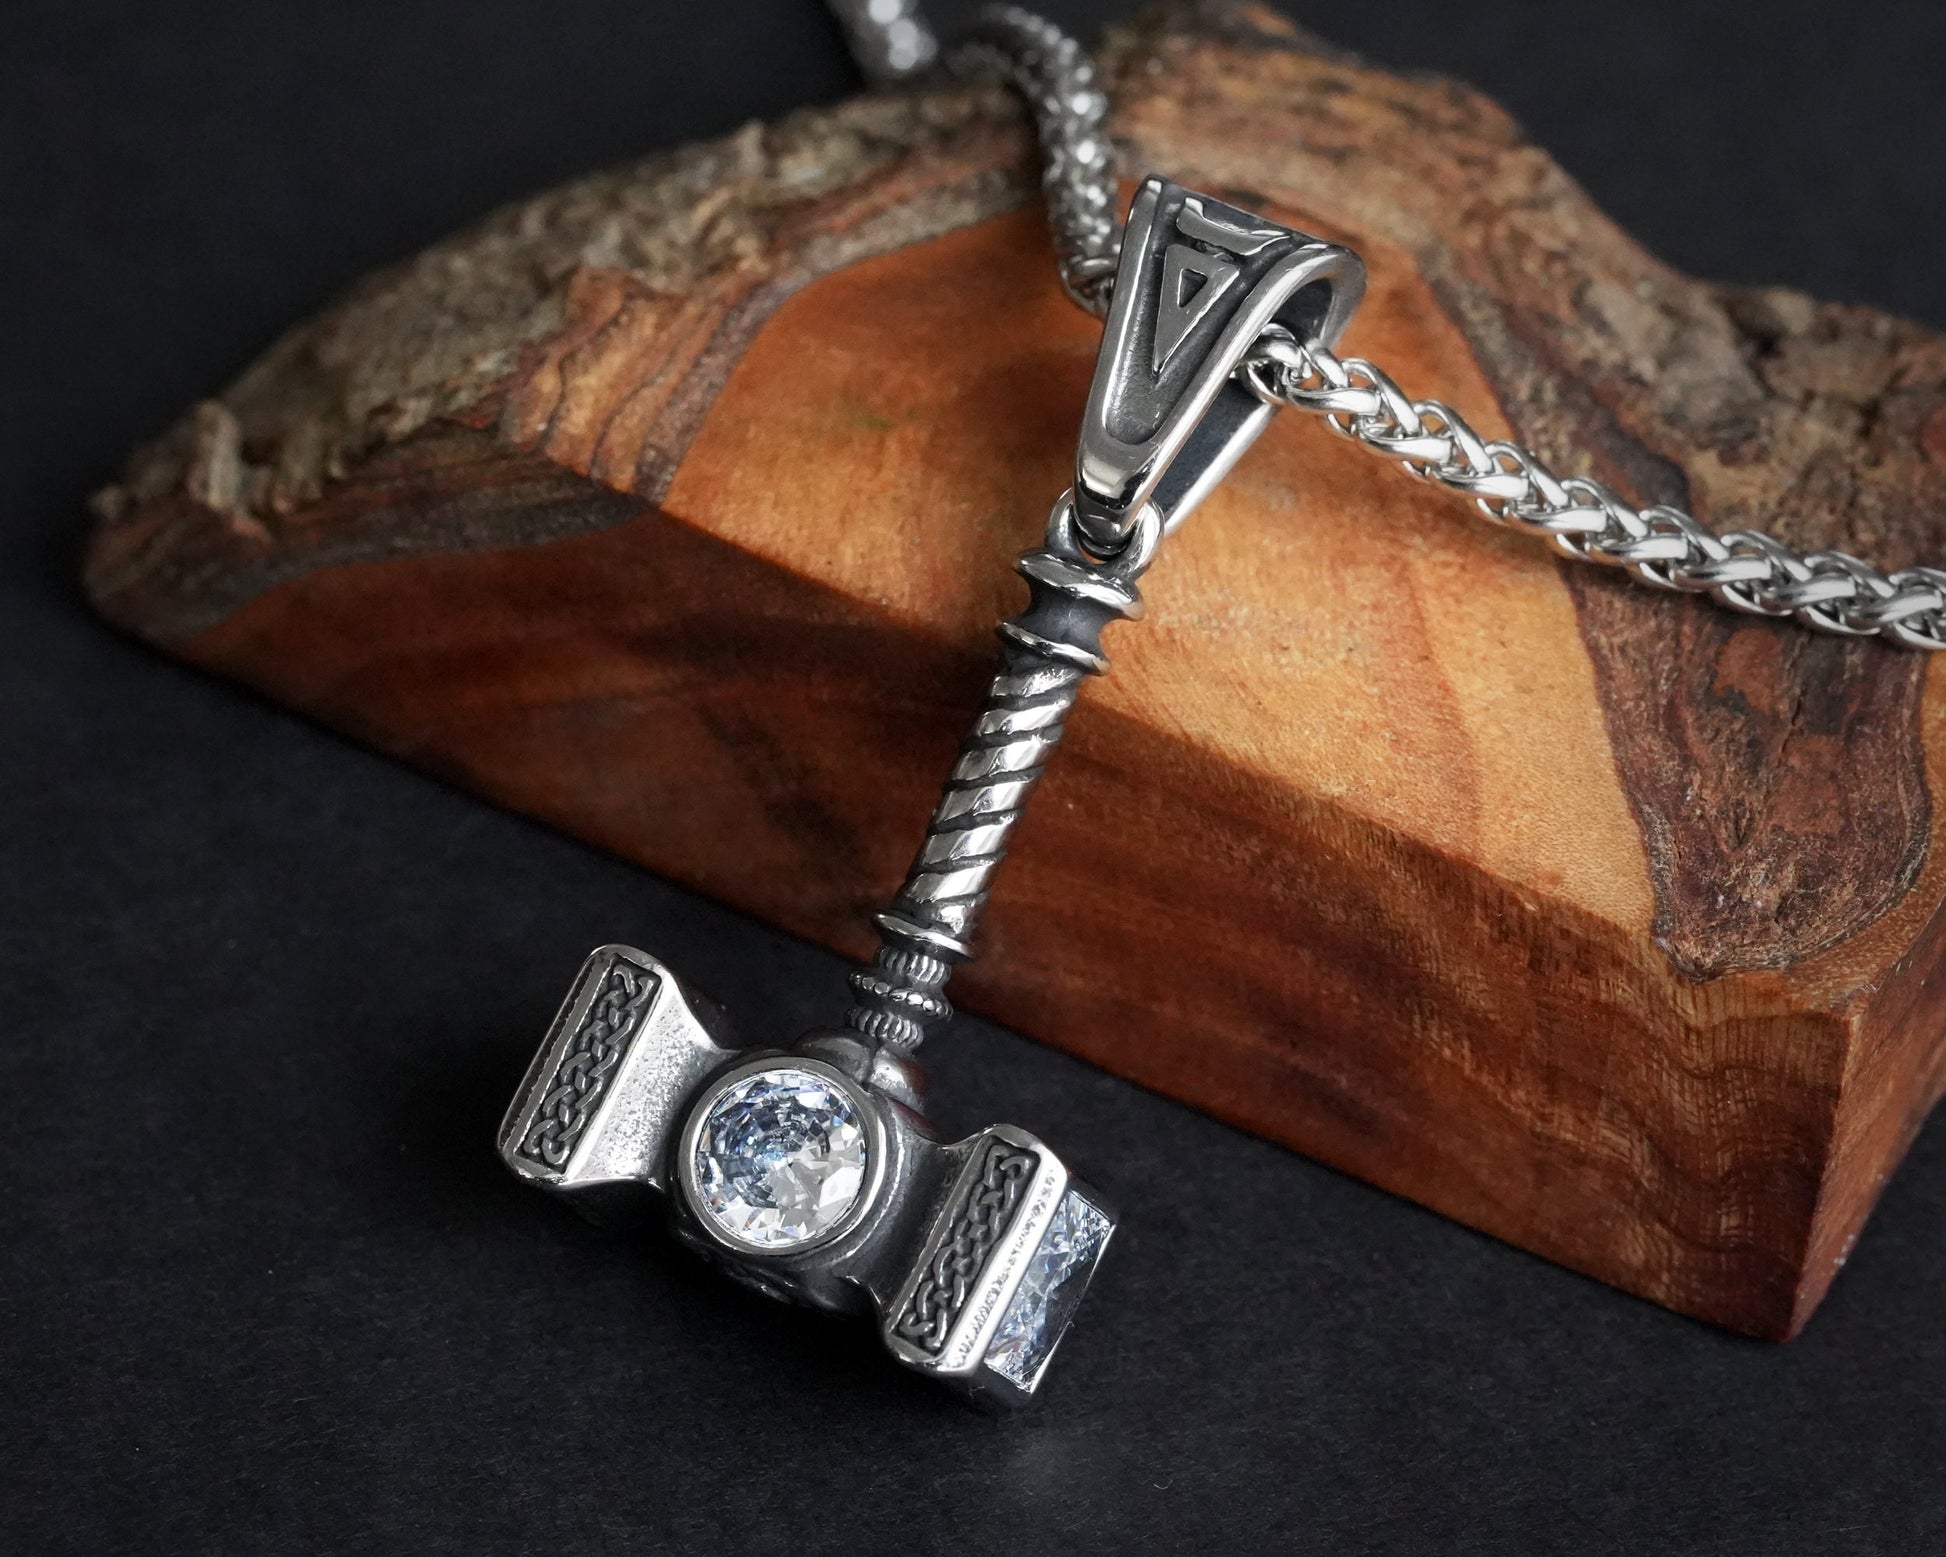 Handmade Viking Thor Hammer with Gemstone Crystals Necklace Pendant For Men and Women With Strong 22 Inches Long Chain, Golden / Silver - Baldur Jewelry